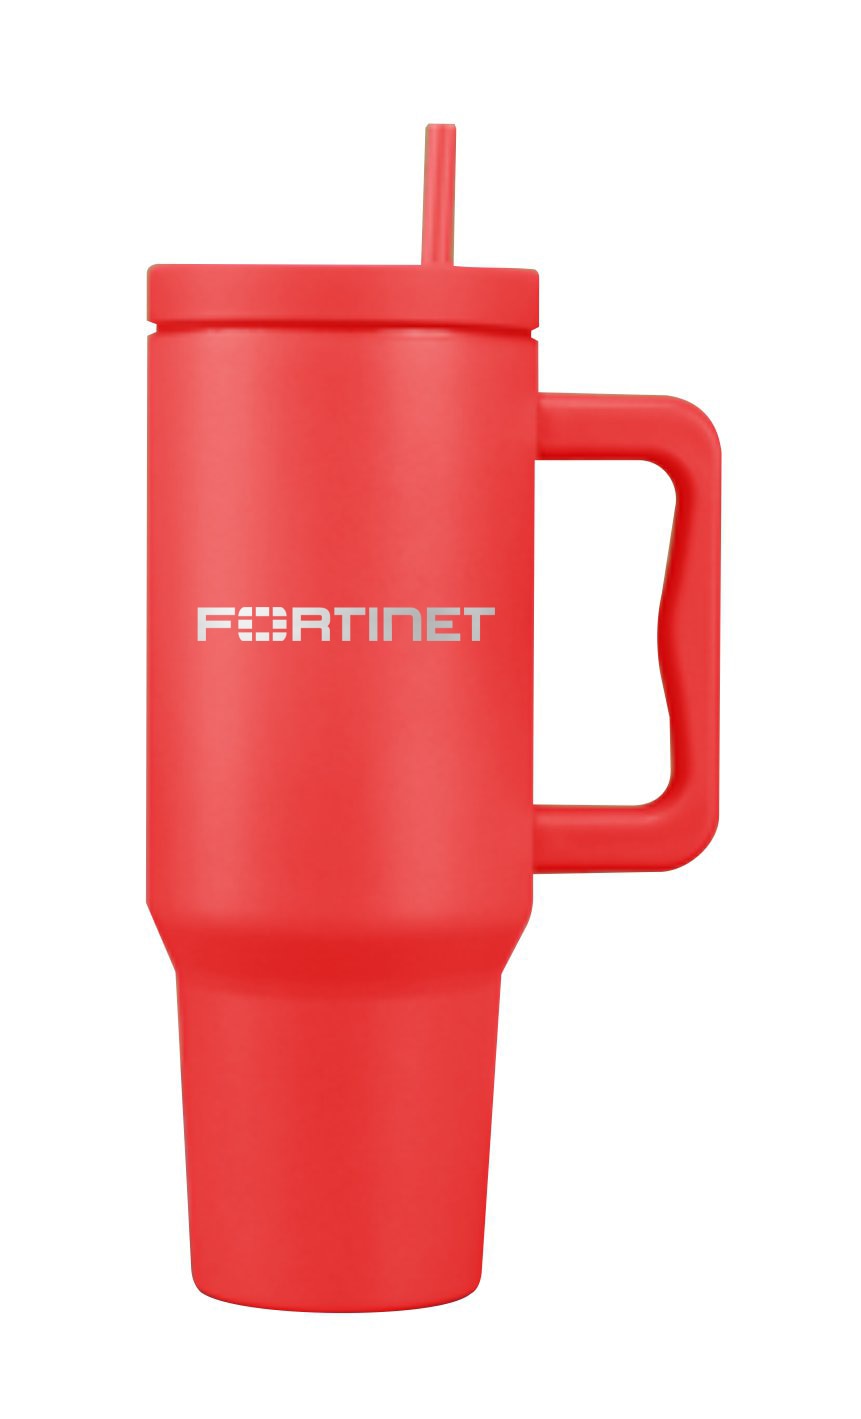 https://store.fortinet.com/ccstore/v1/images/?source=/file/v4118330184247098327/products/40oz%20tumbler%20with%20straw-red-wht%20bg.png